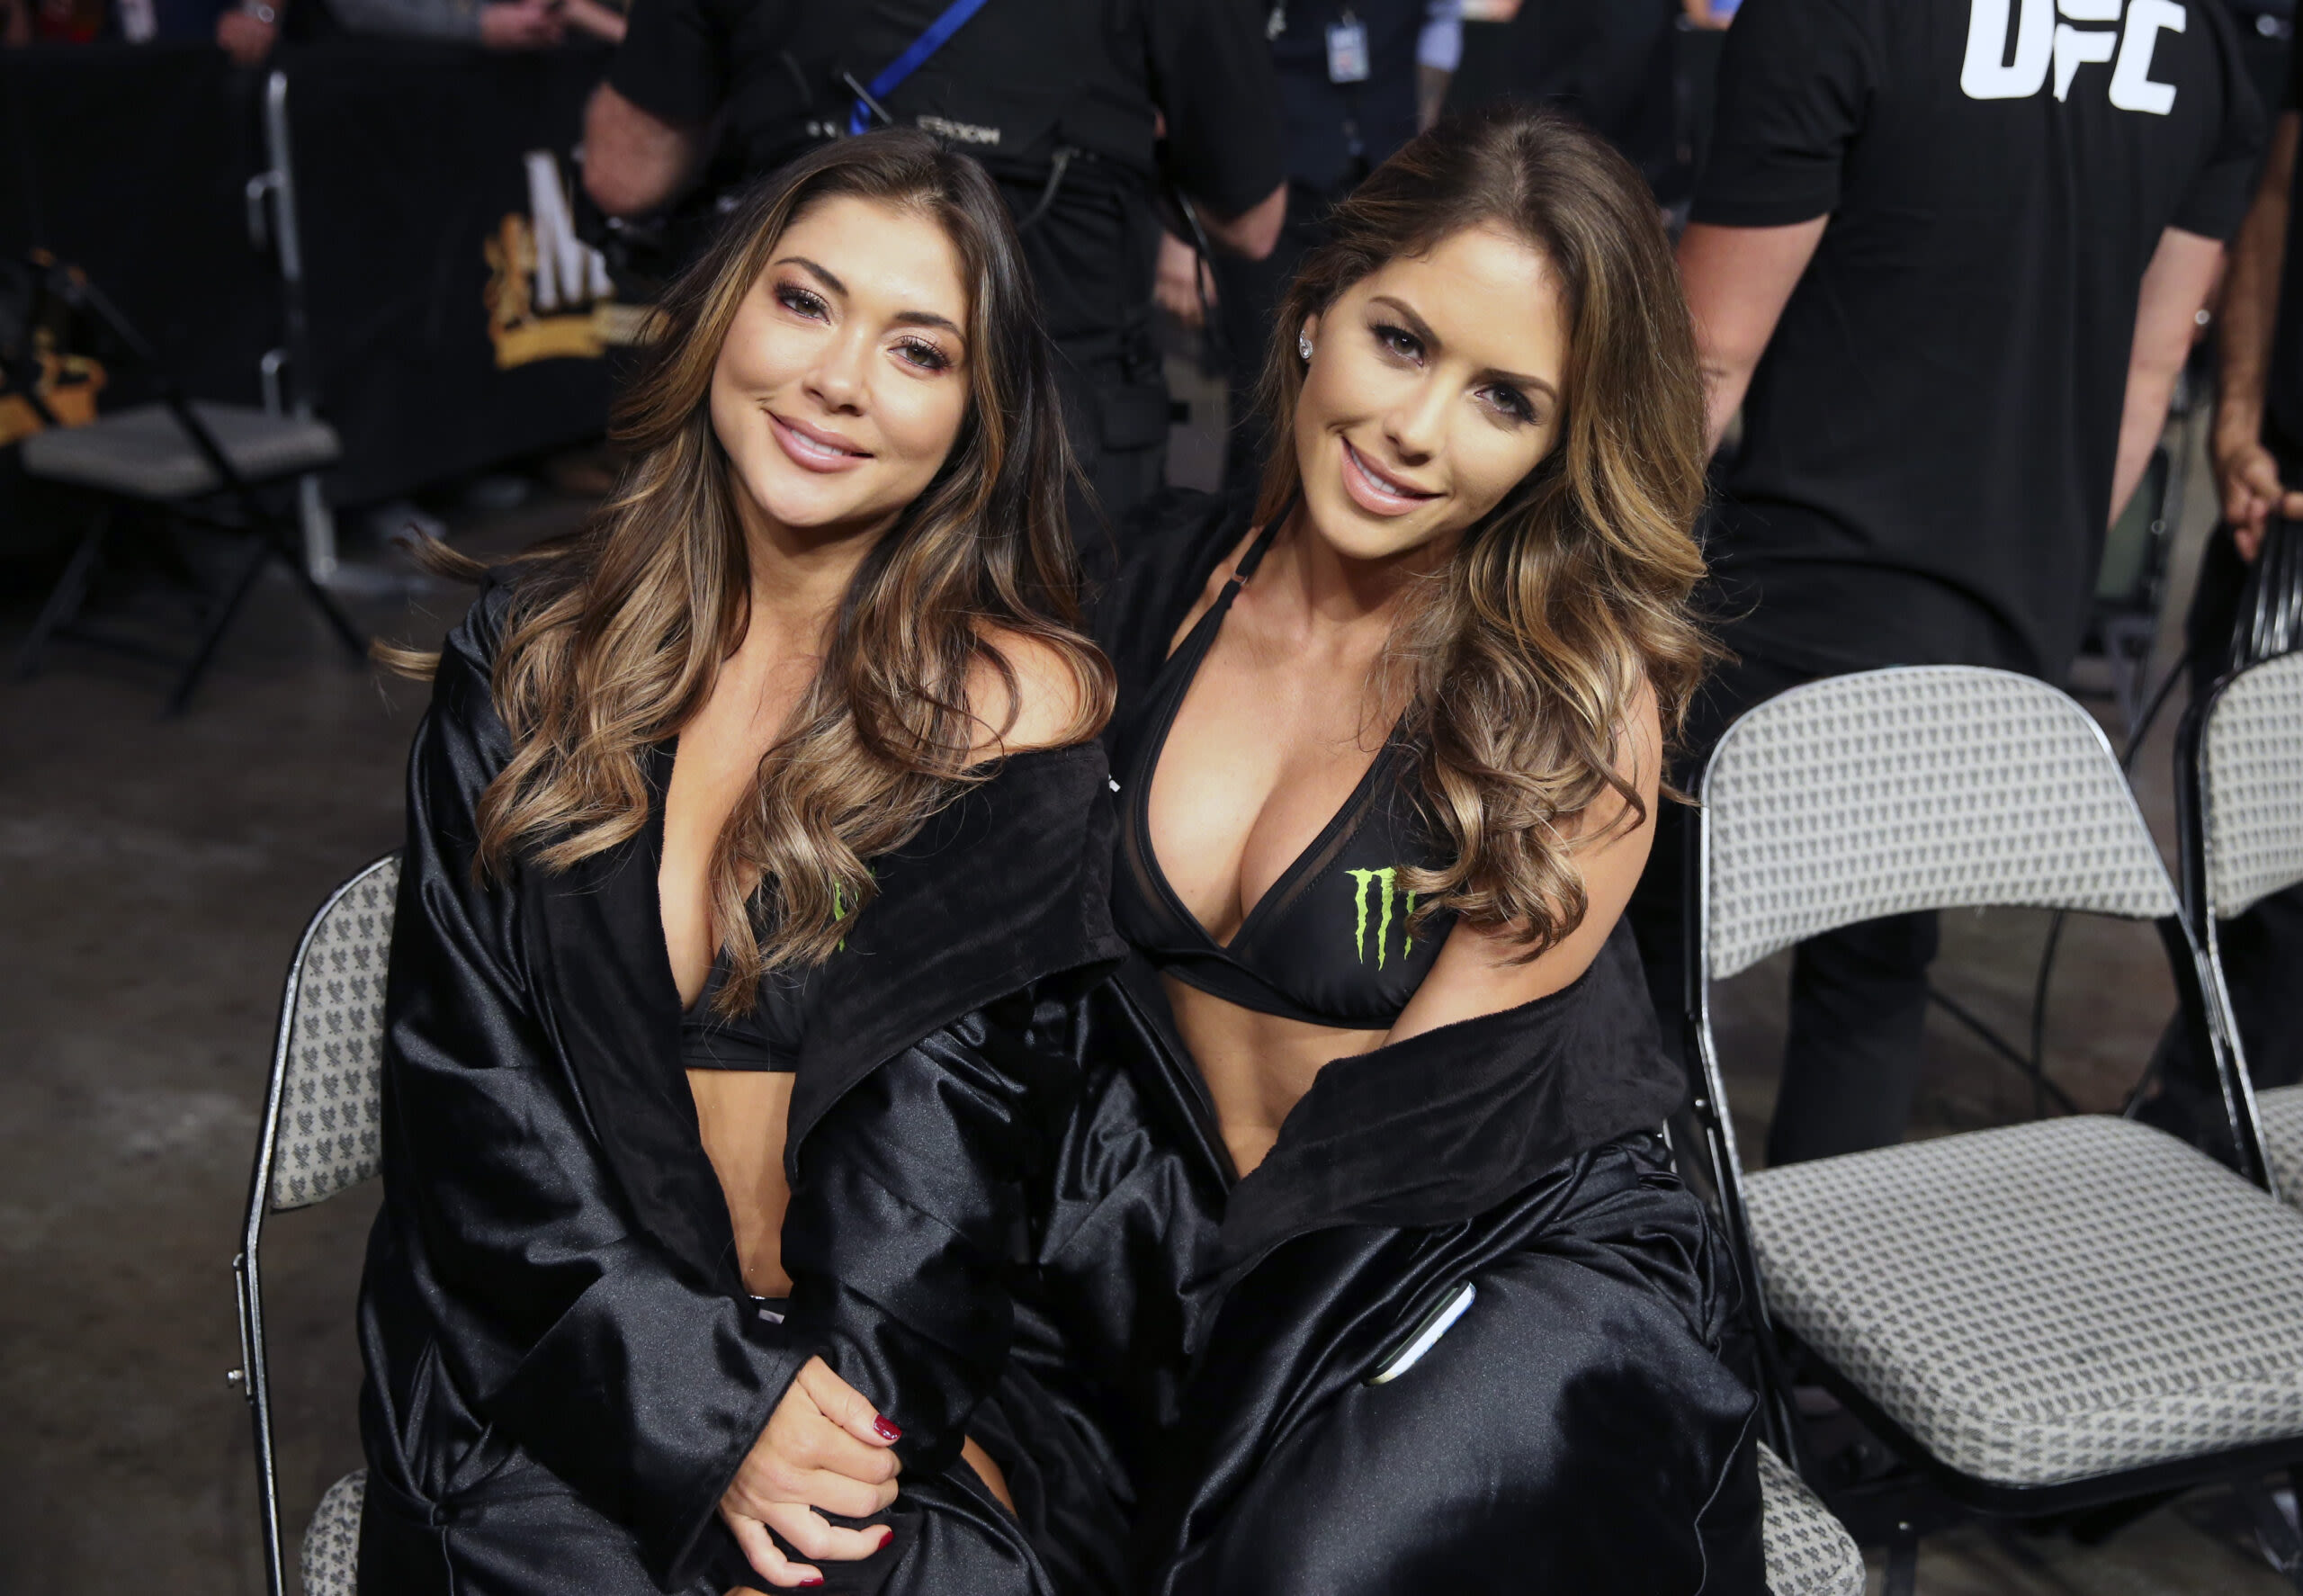 The best of UFC ring girls in images